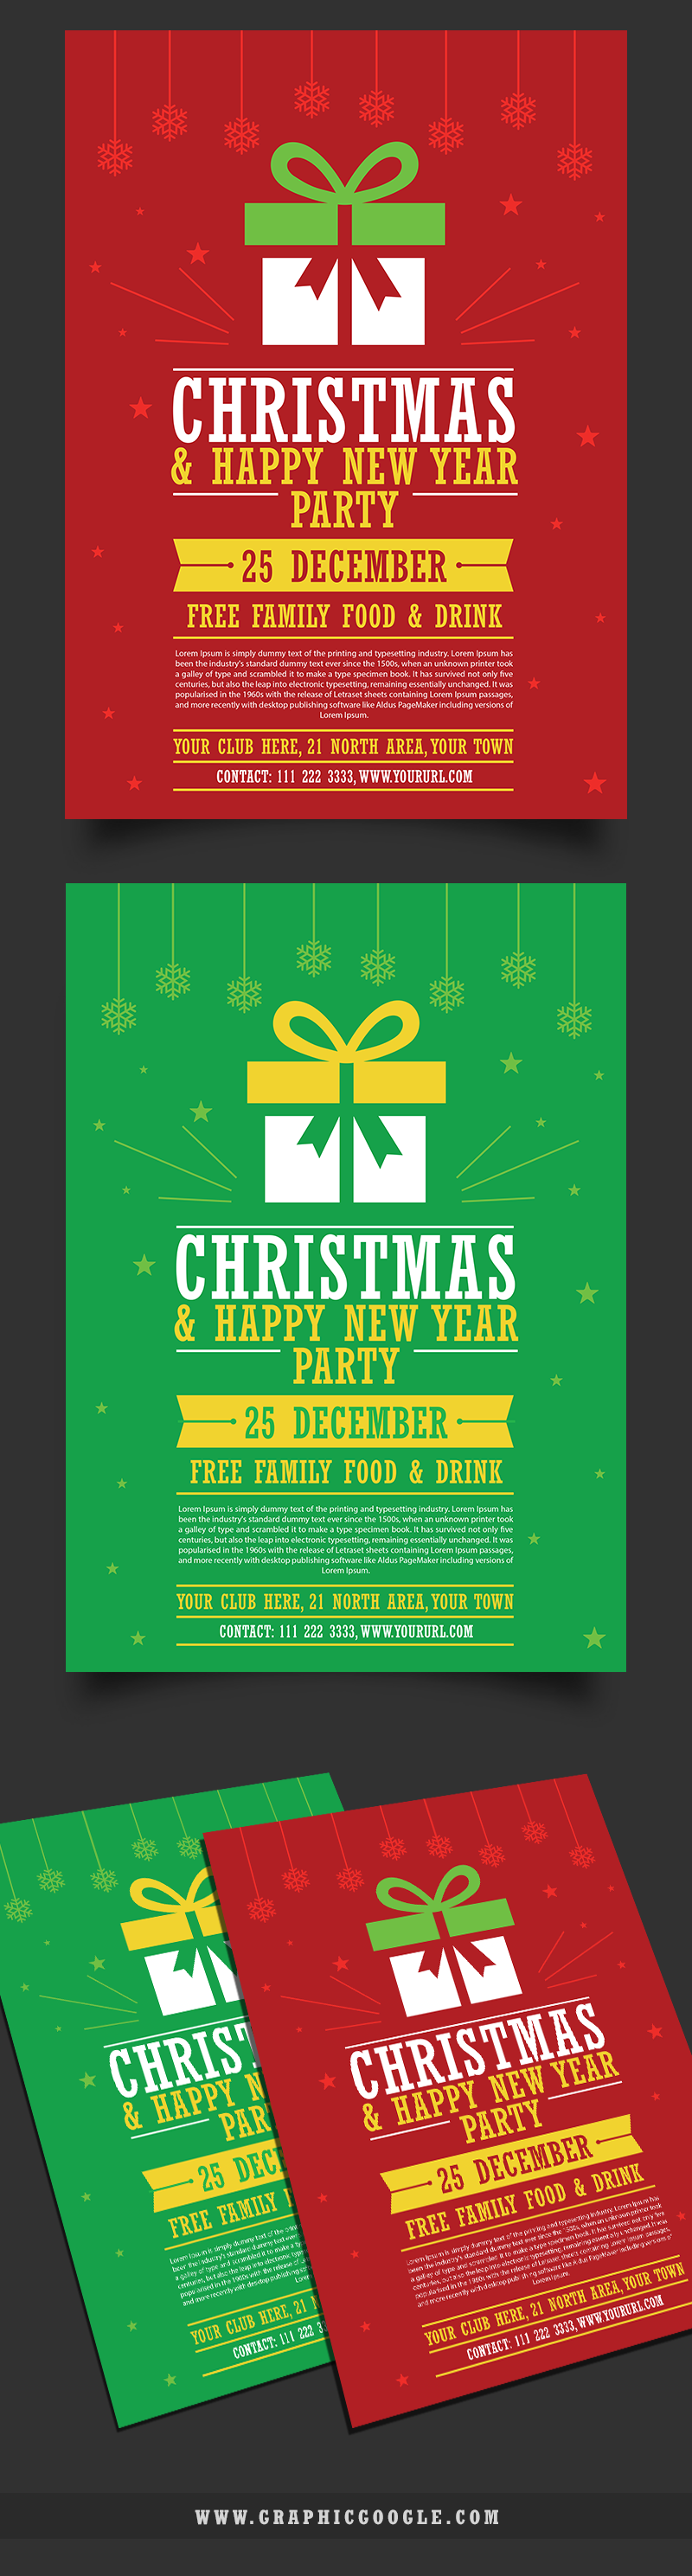 free-christmas-happy-new-year-party-flyer-template-feature-image-2